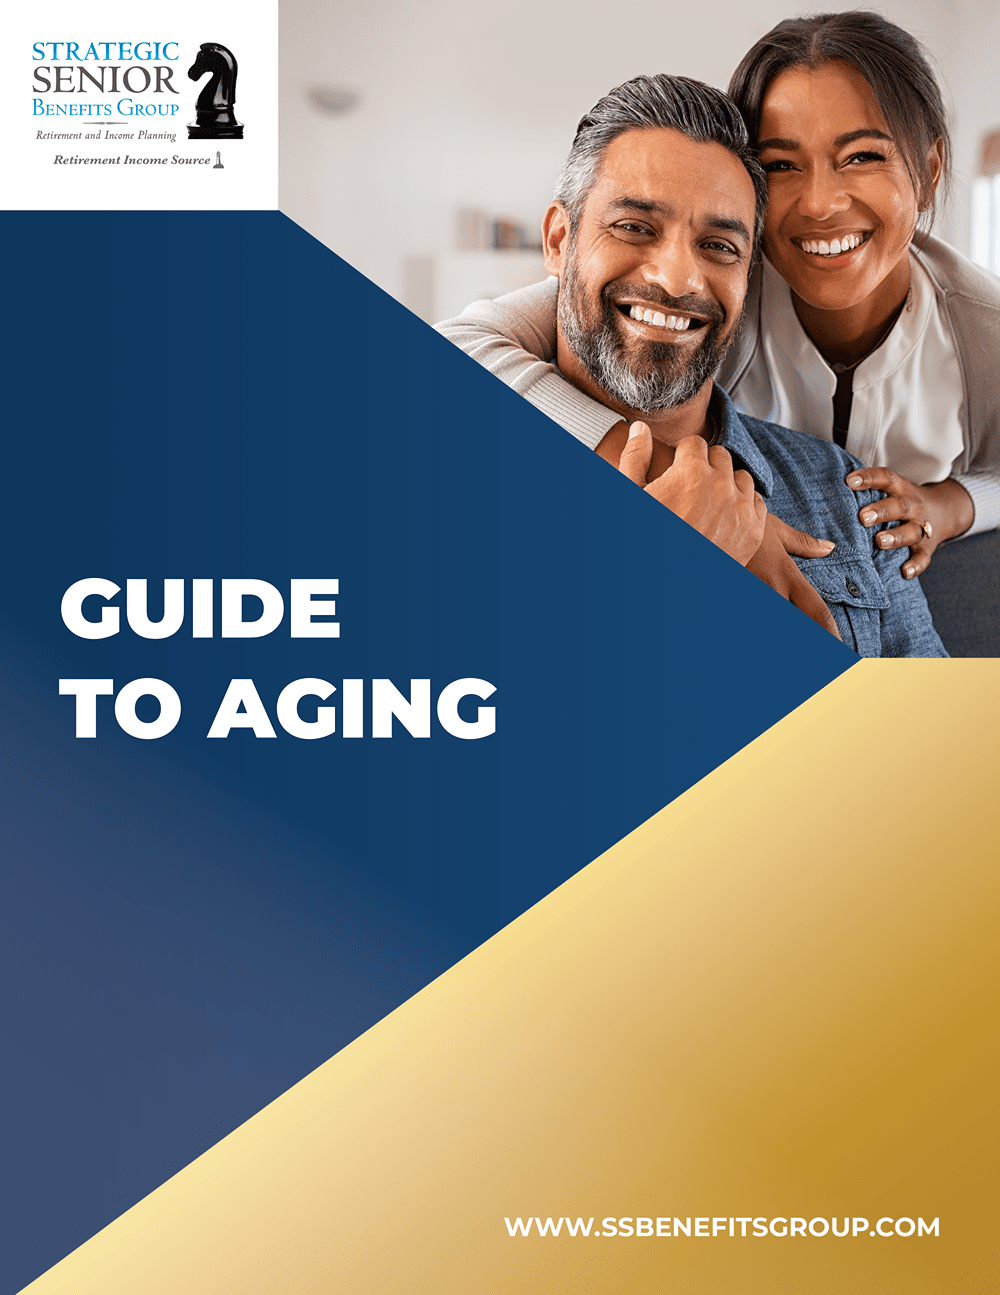 Strategic Senior Benefits Group - Guide to Aging-1